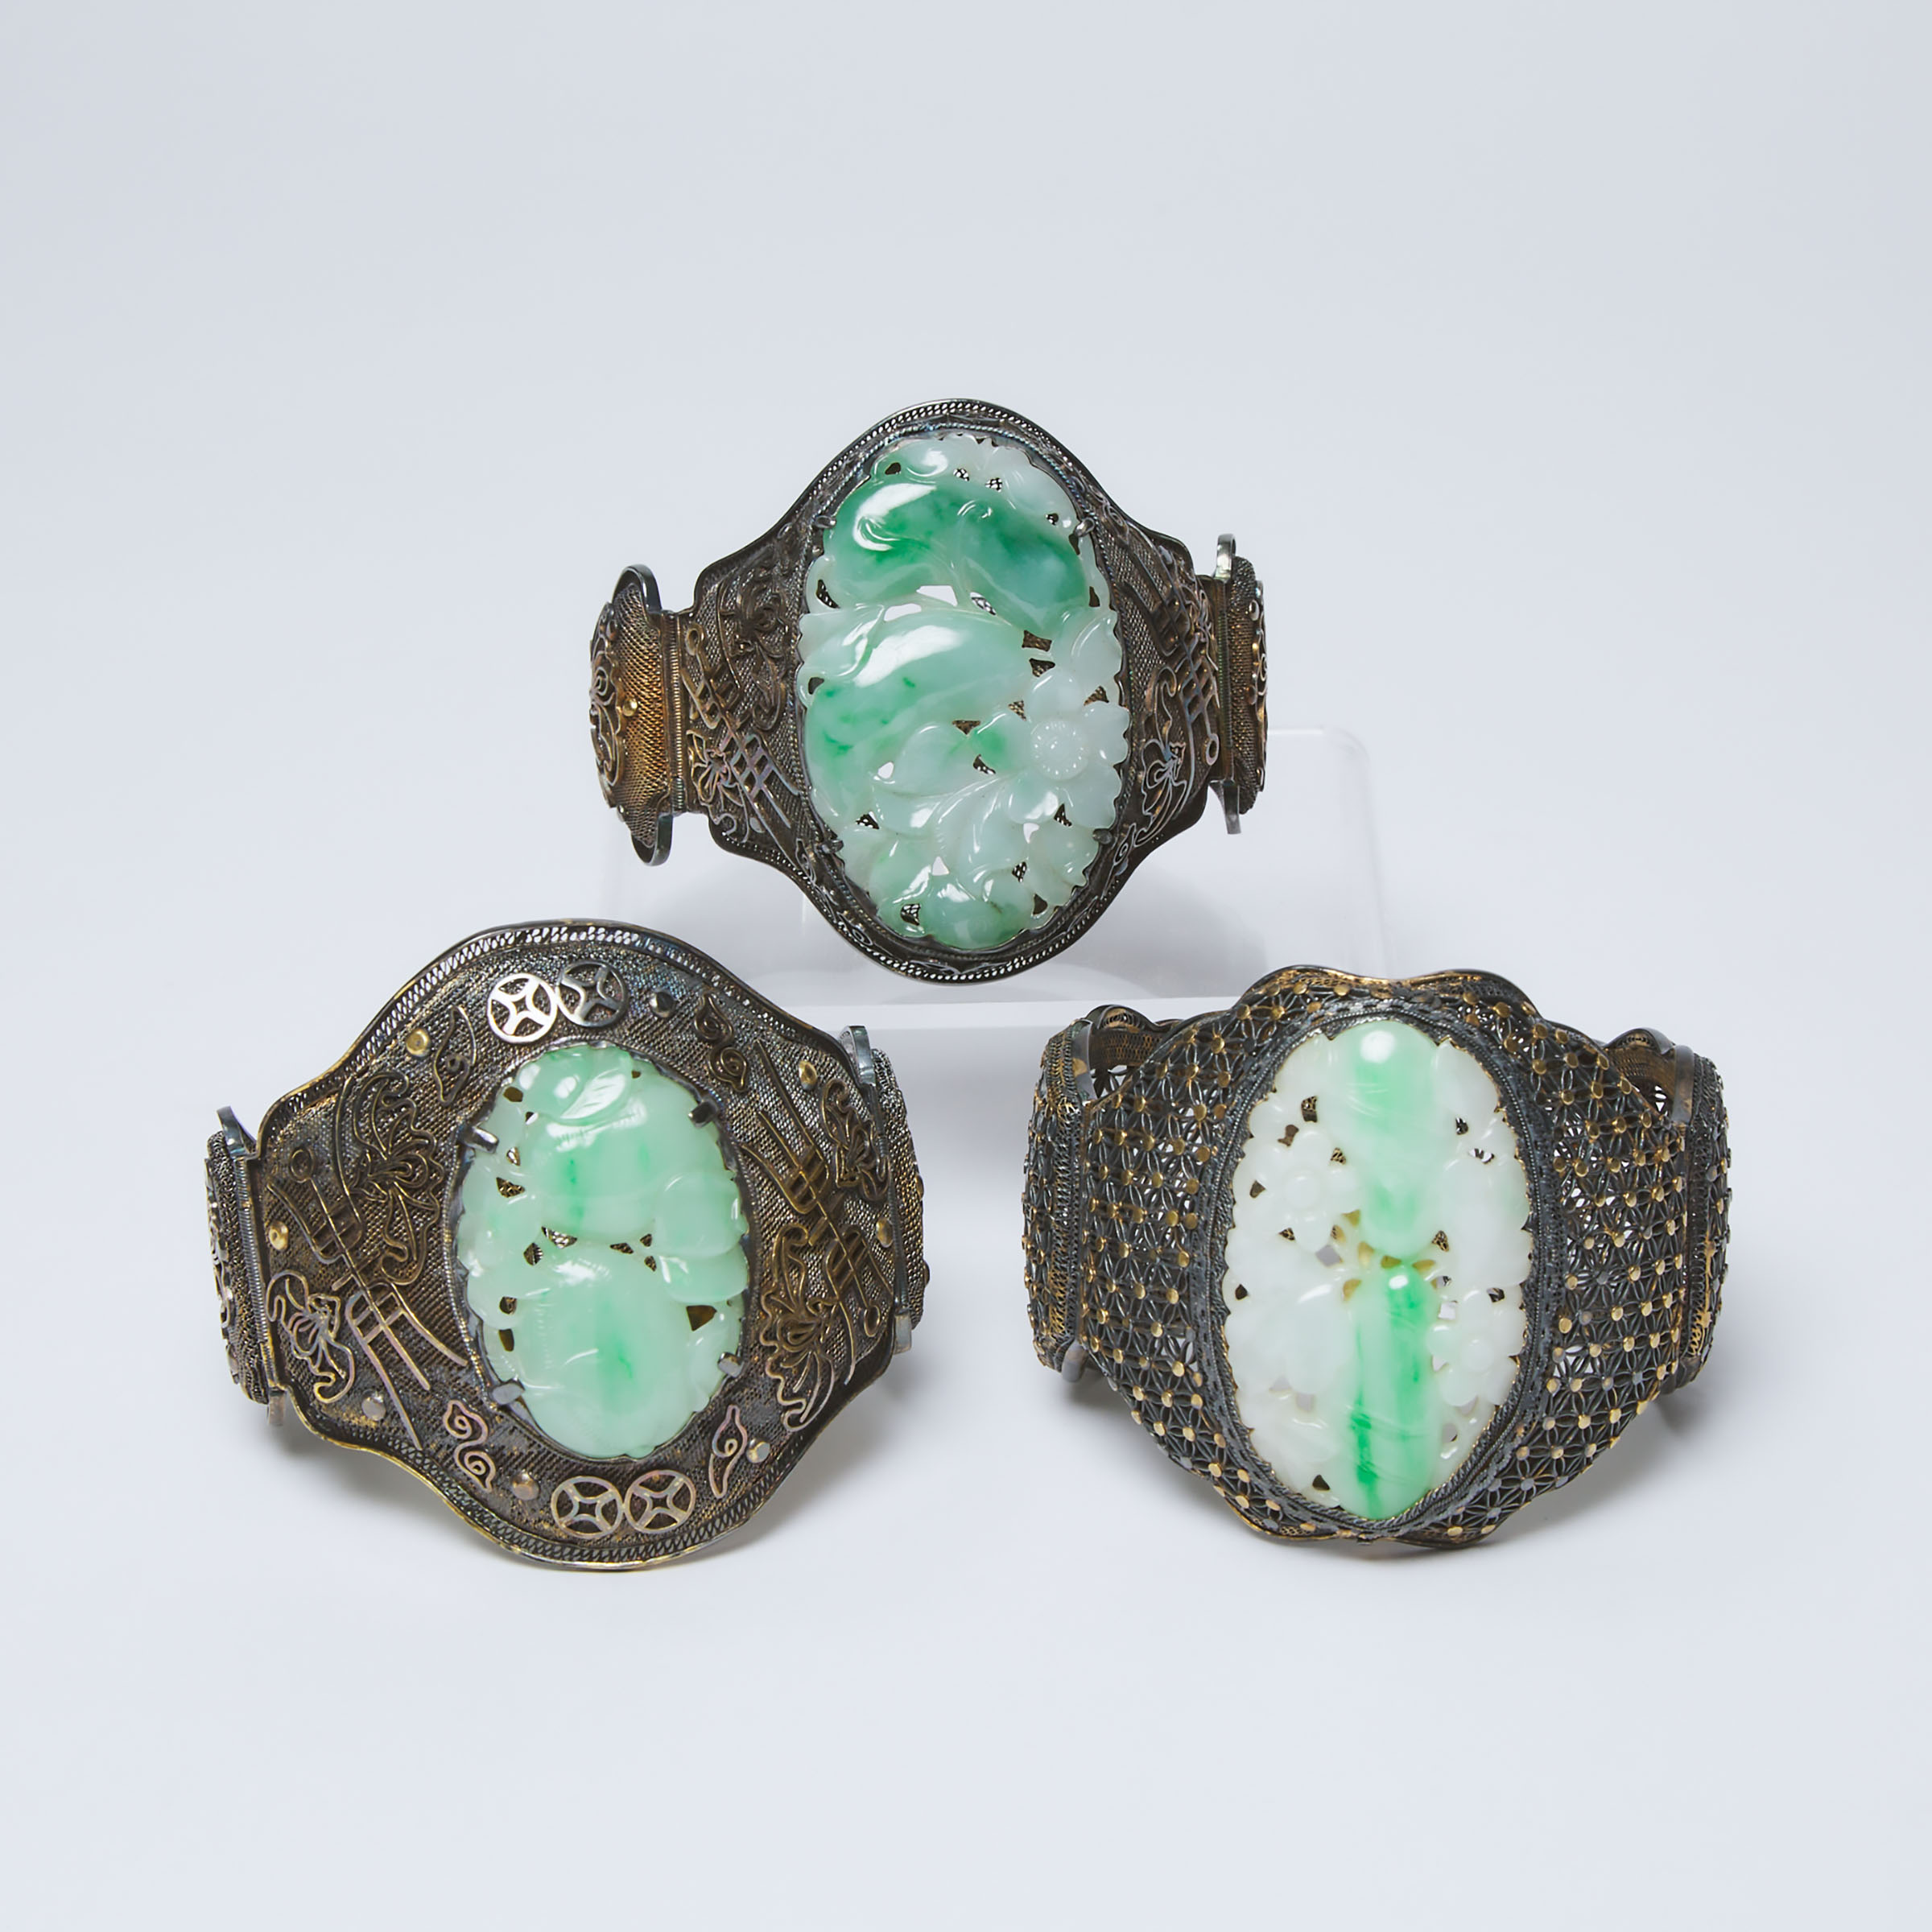 Three Chinese Silver Filigree 'Longevity' Bangles Inset with Carved Jadeite, Qing Dynasty, 19th Century